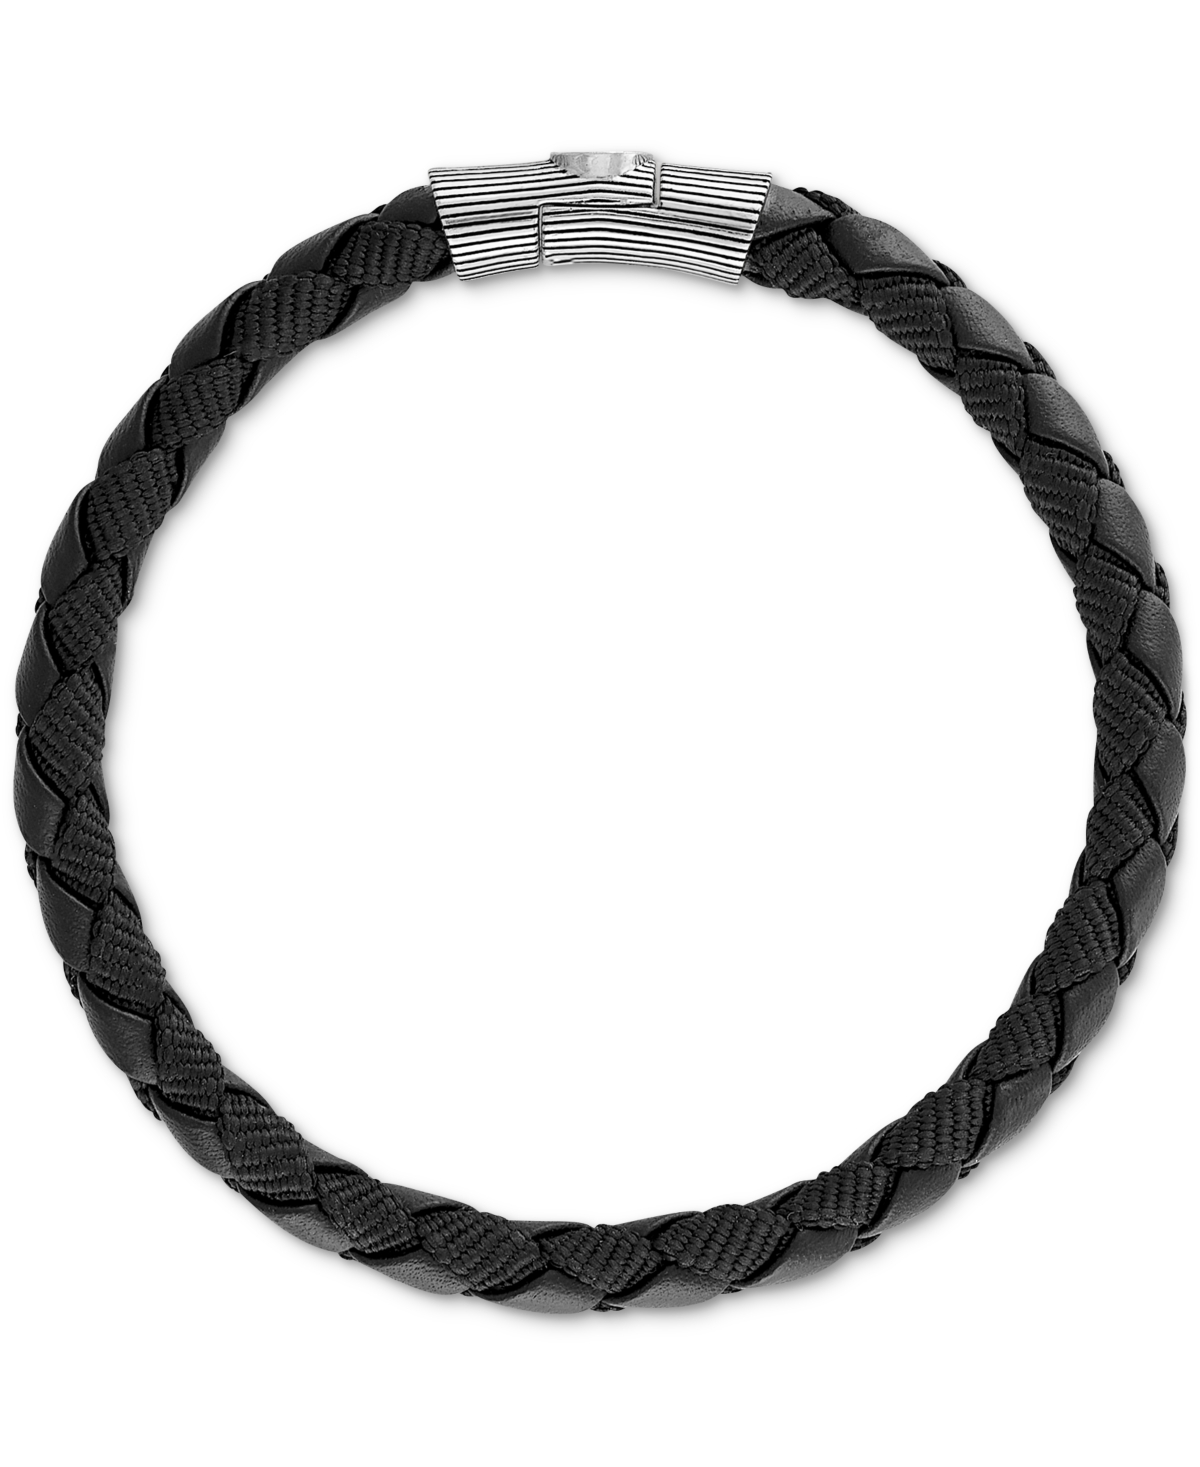 Esquire Men's Jewelry Black Leather Woven Bracelet in Sterling Silver (Also in Brown Leather & Blue Leather), Created for Macy's